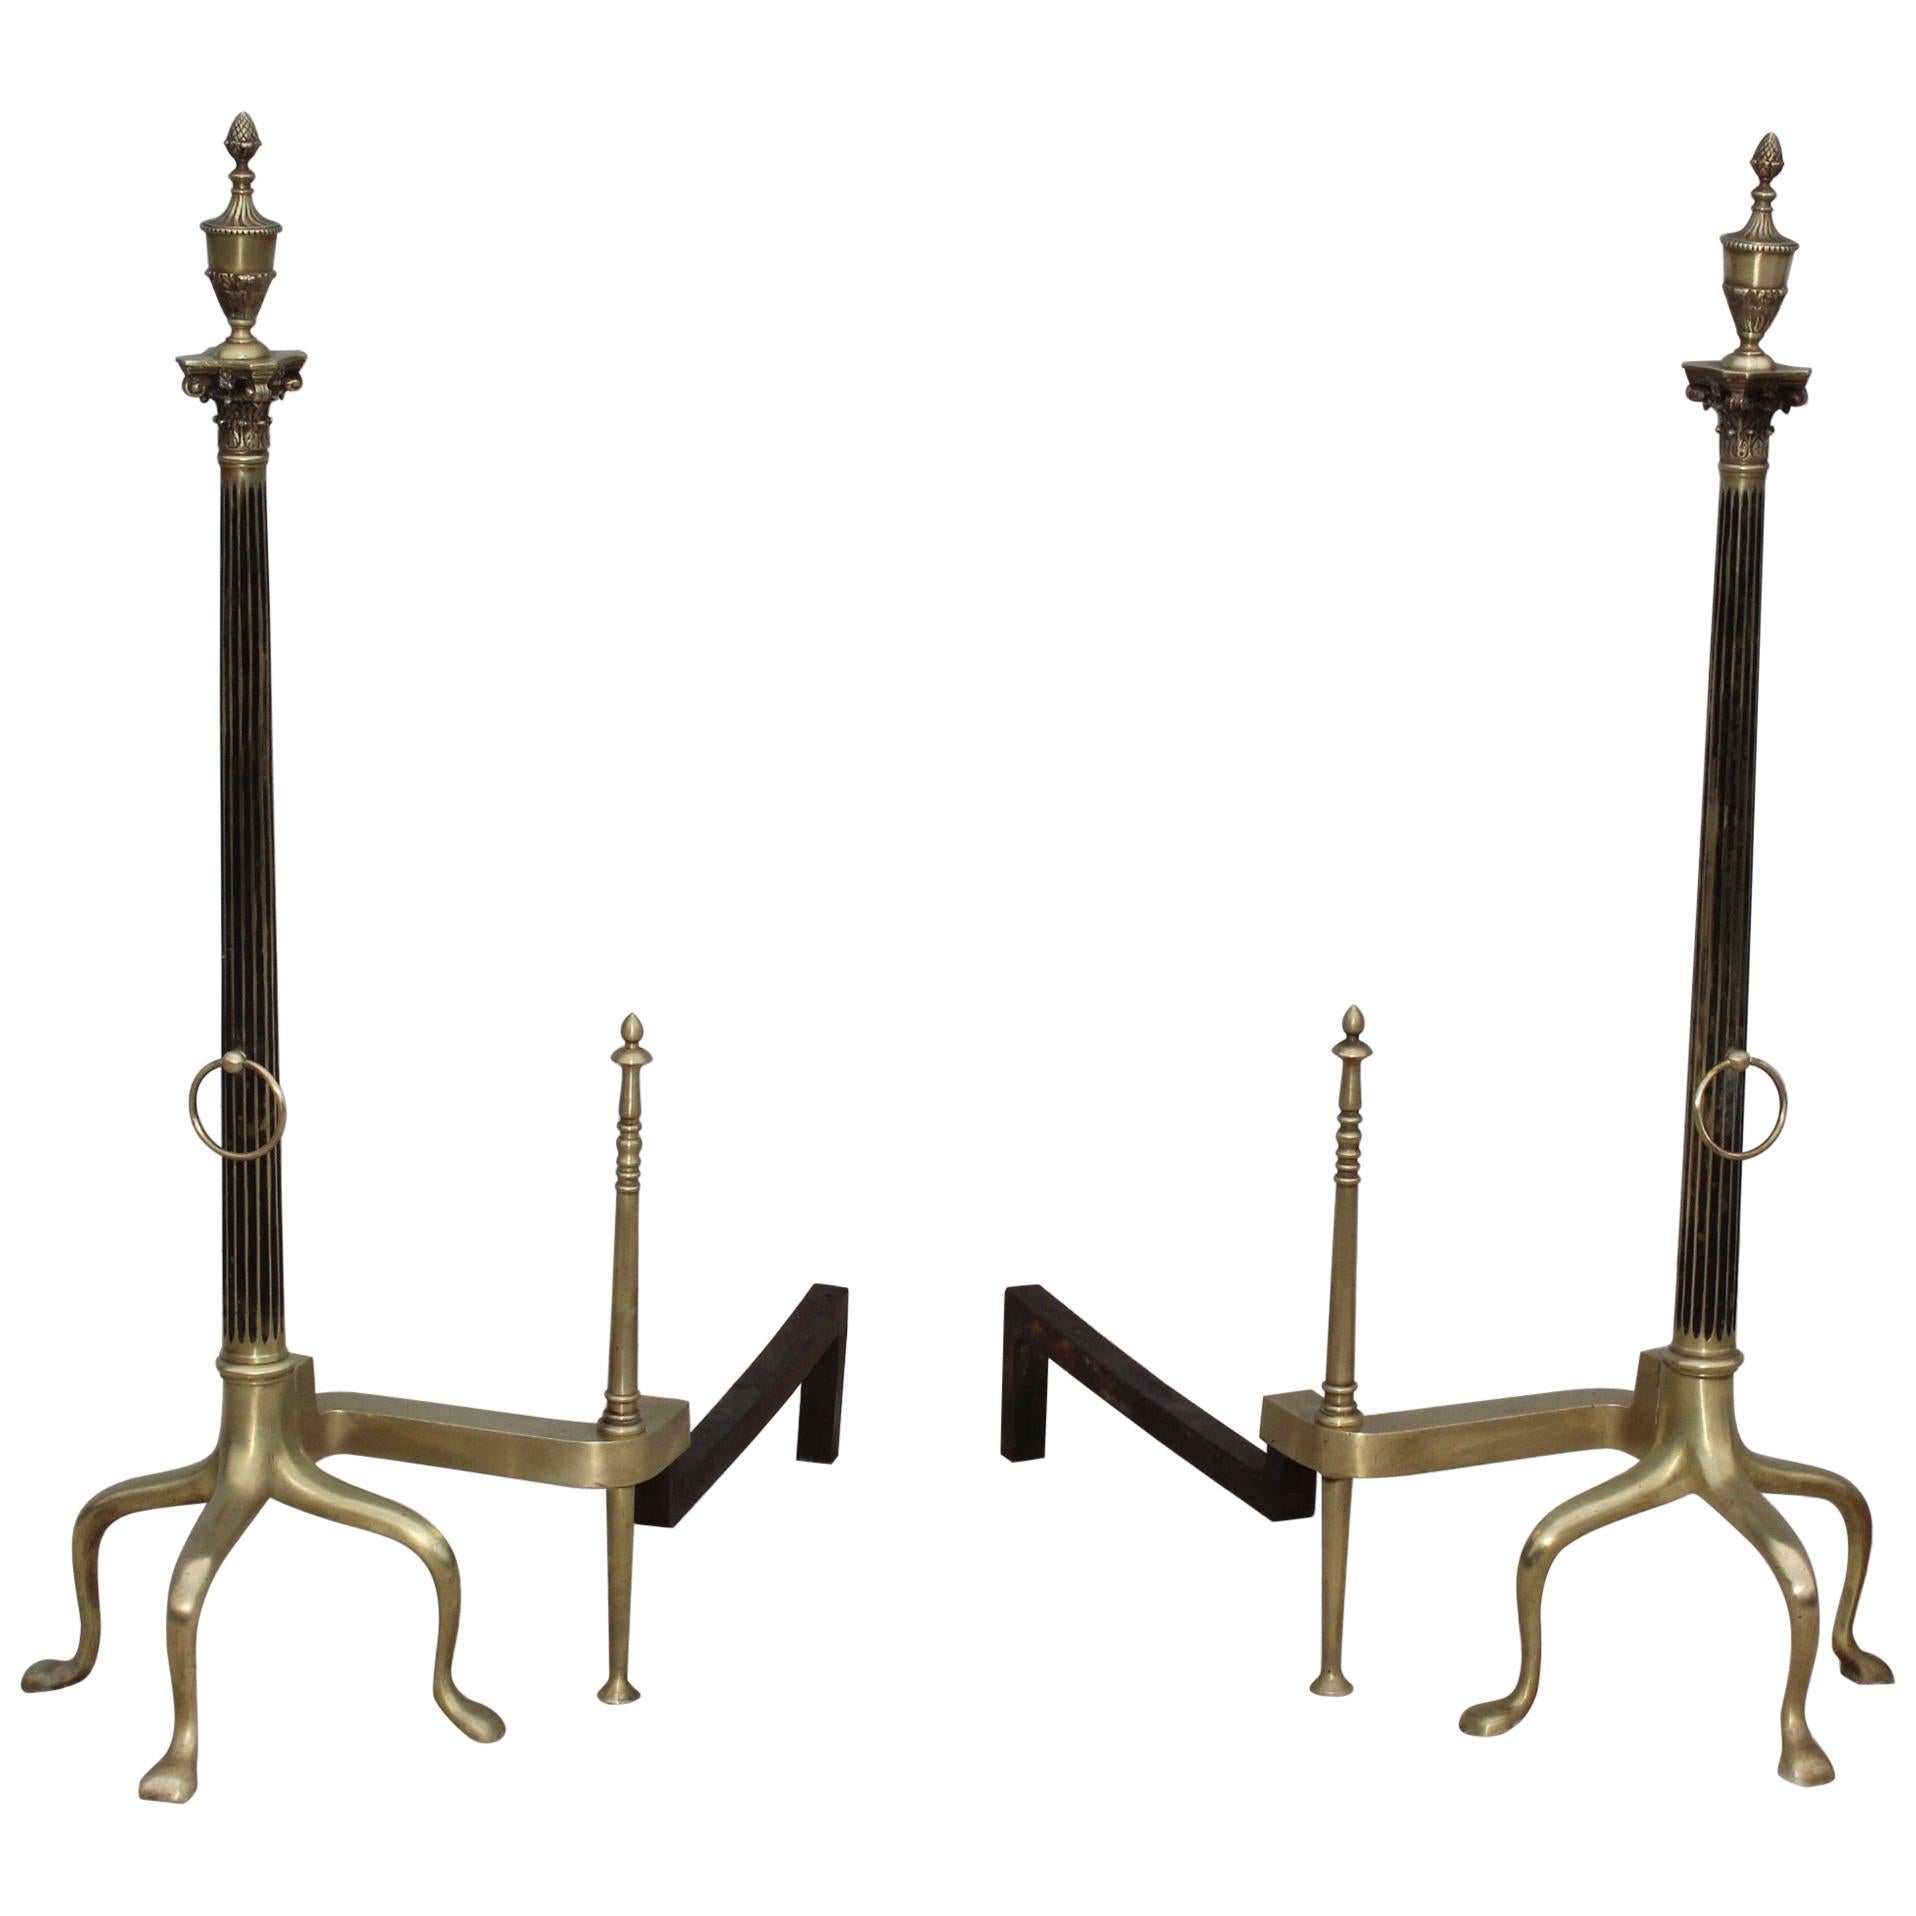 1960's Large Mid-Century Modern French Brass Andirons For Sale